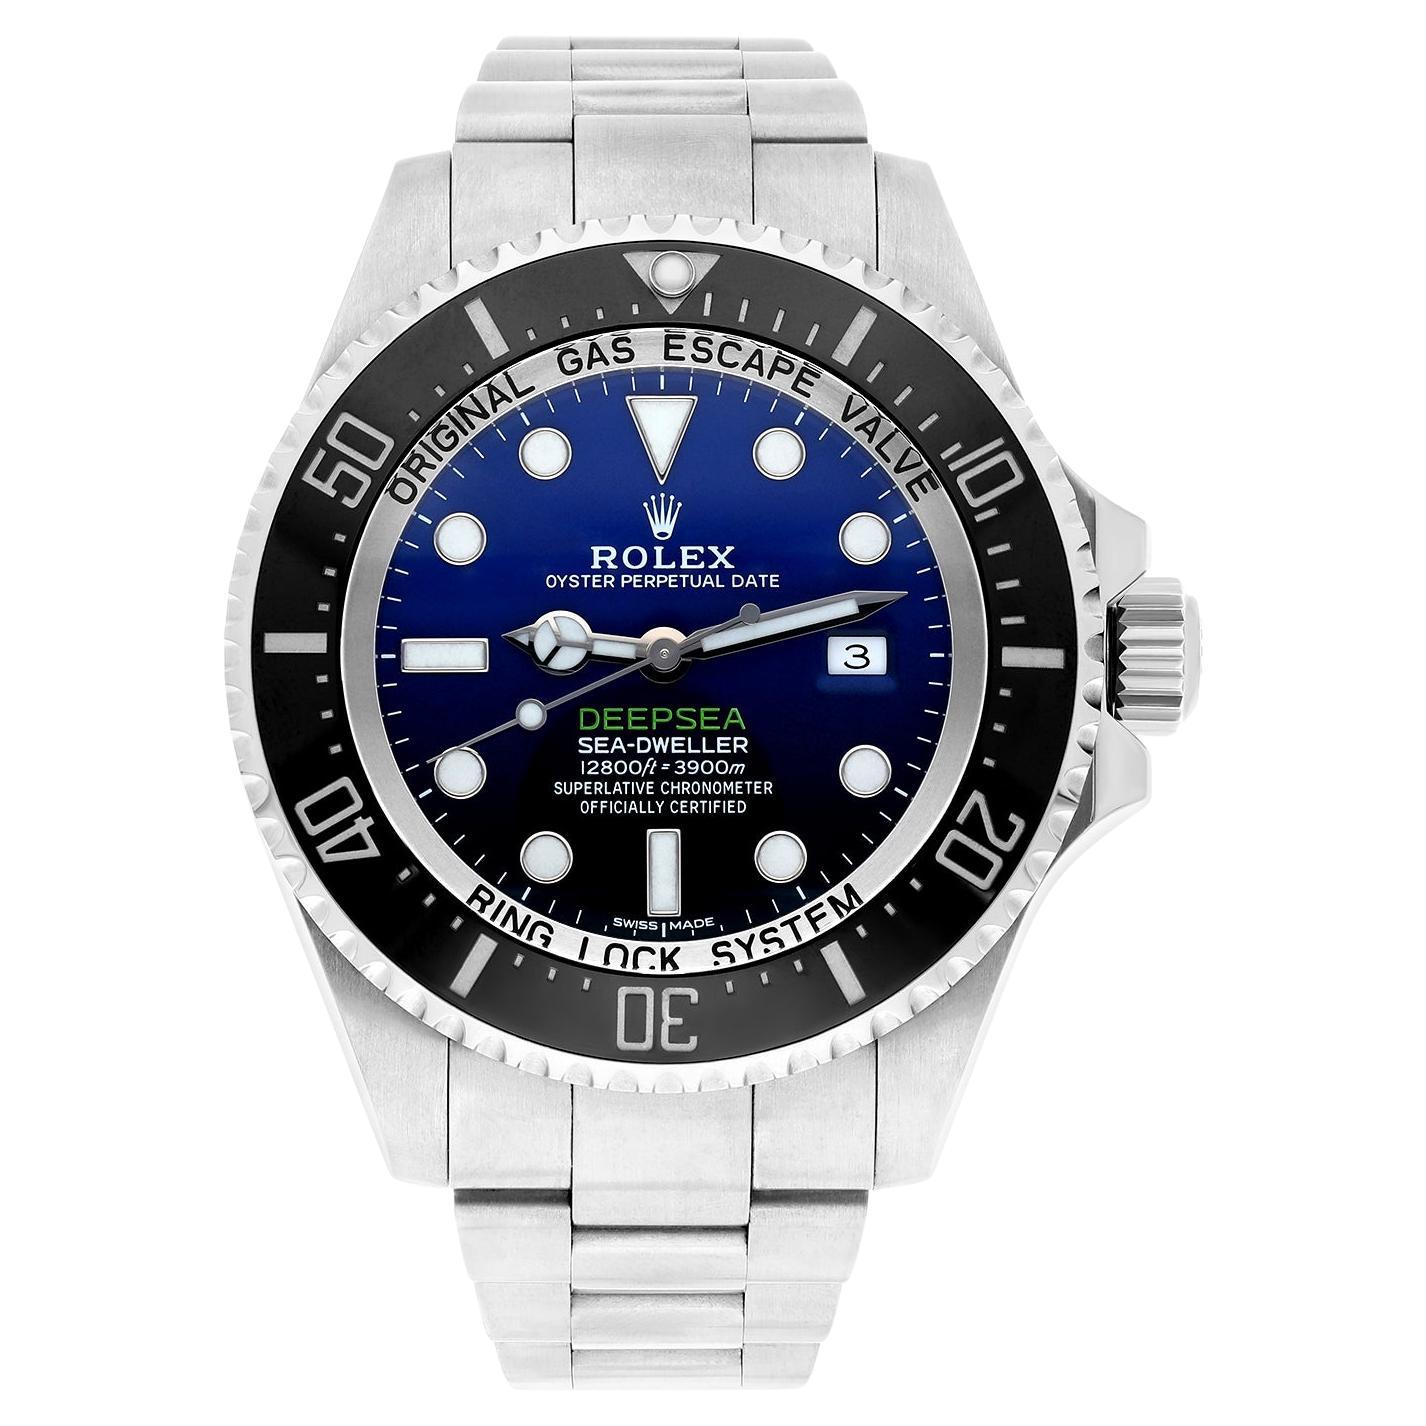 Silver-tone stainless steel case with a silver-tone stainless steel oyster bracelet. Uni-directional rotating black cerachrom top ring stainless steel bezel. Deep blue dial with luminous silver-tone Mercedes-logo, sword, and Breguet-style shape